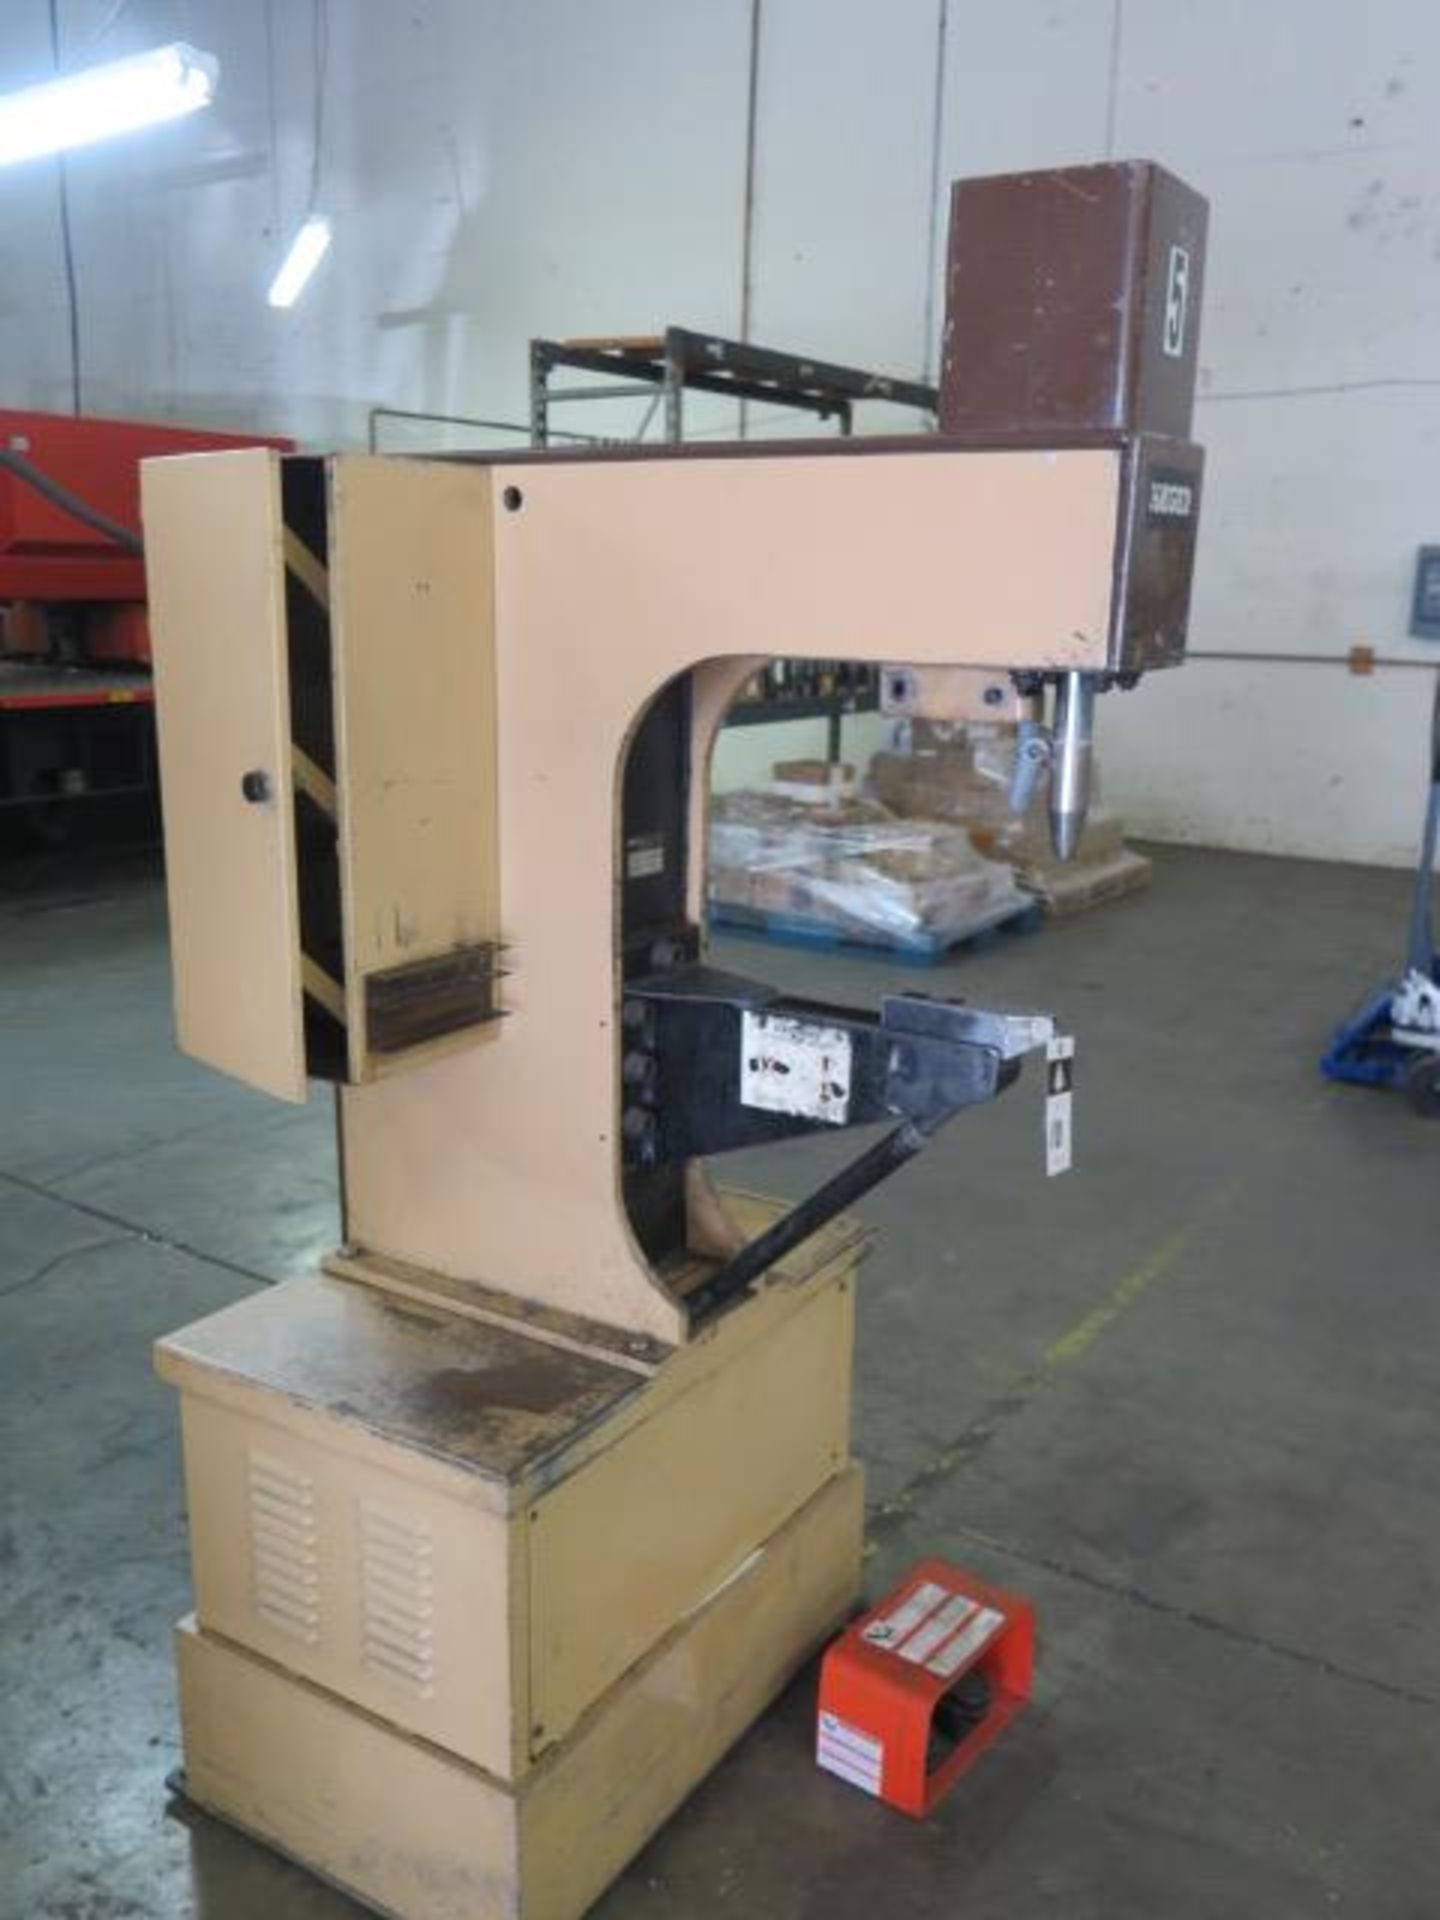 Haeger HP6-B 6 Ton x 18" Hardware Insertion Press s/n 684 (SOLD AS-IS - NO WARRANTY) - Image 3 of 9